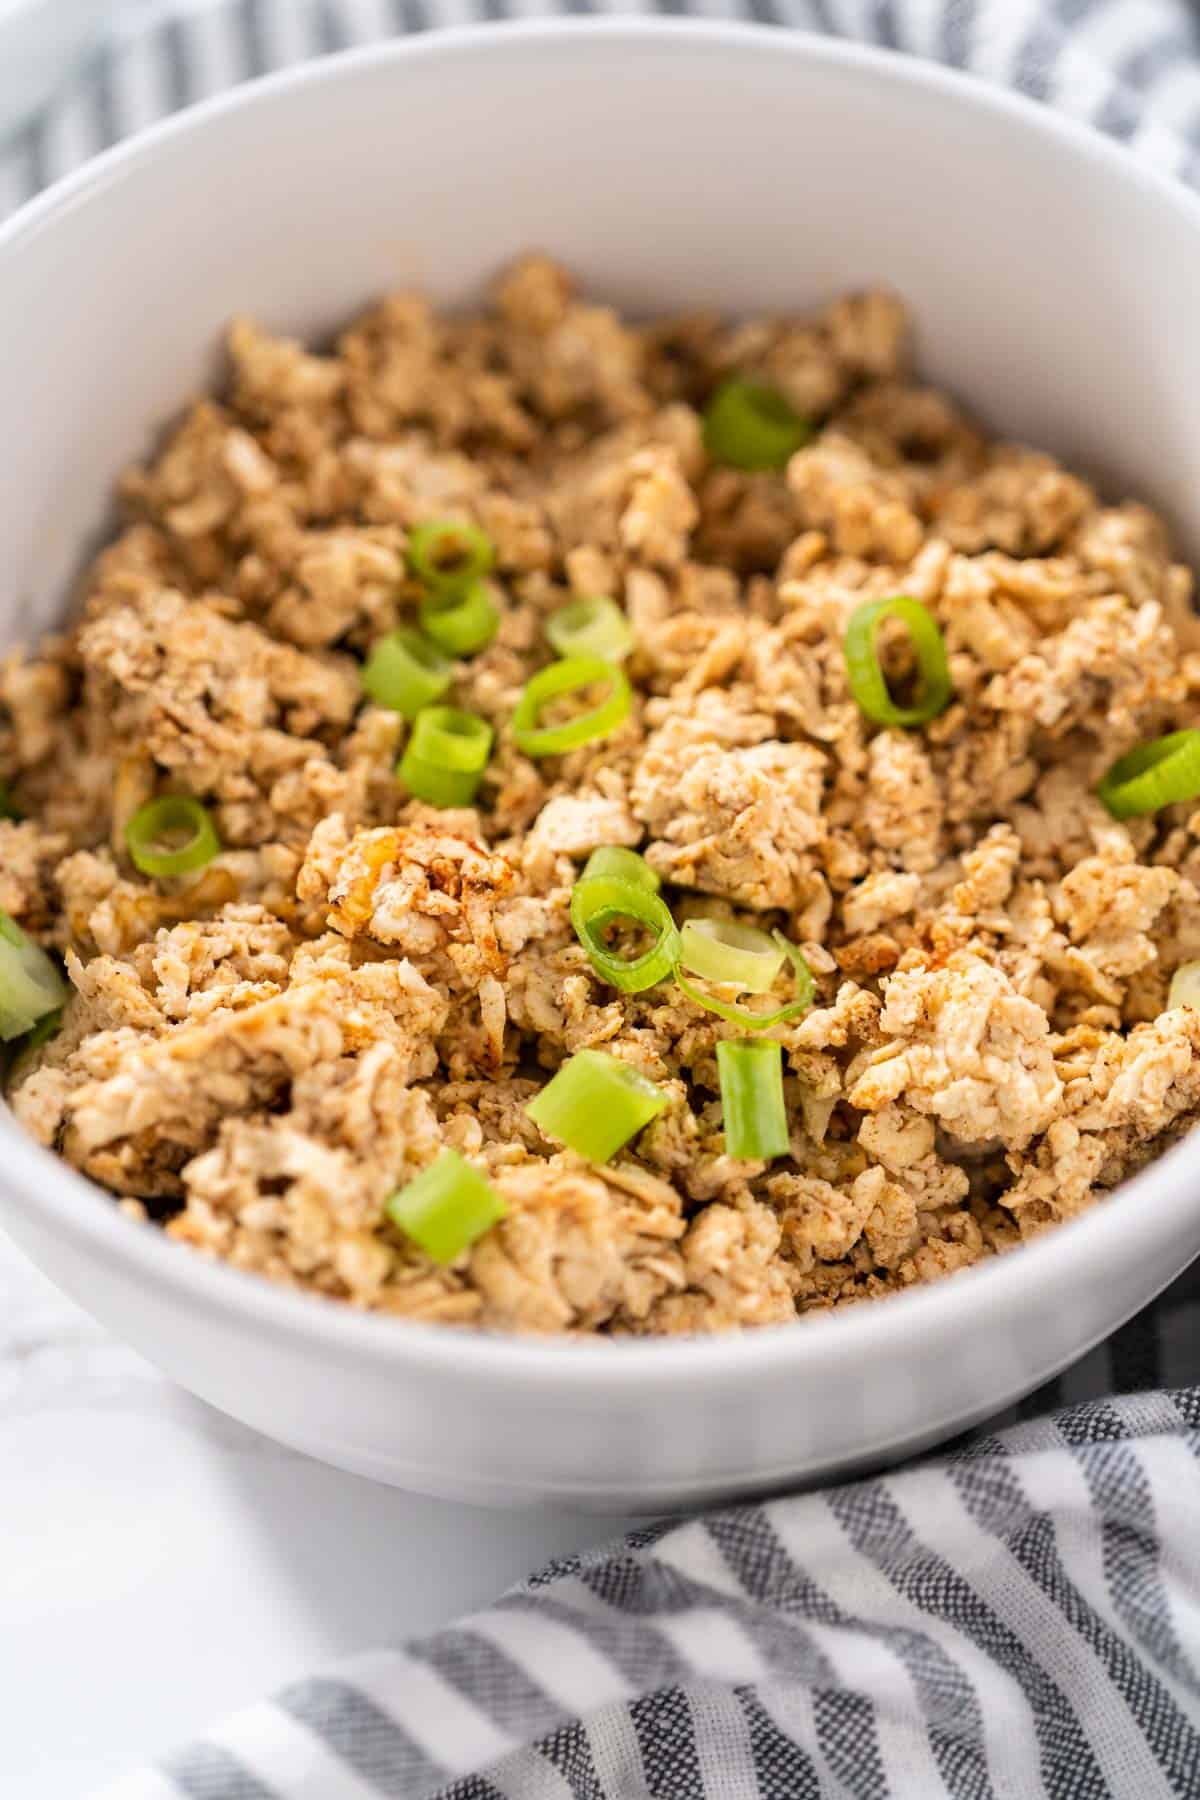 Tofu ground beef served in a white bowl with green onions on top.